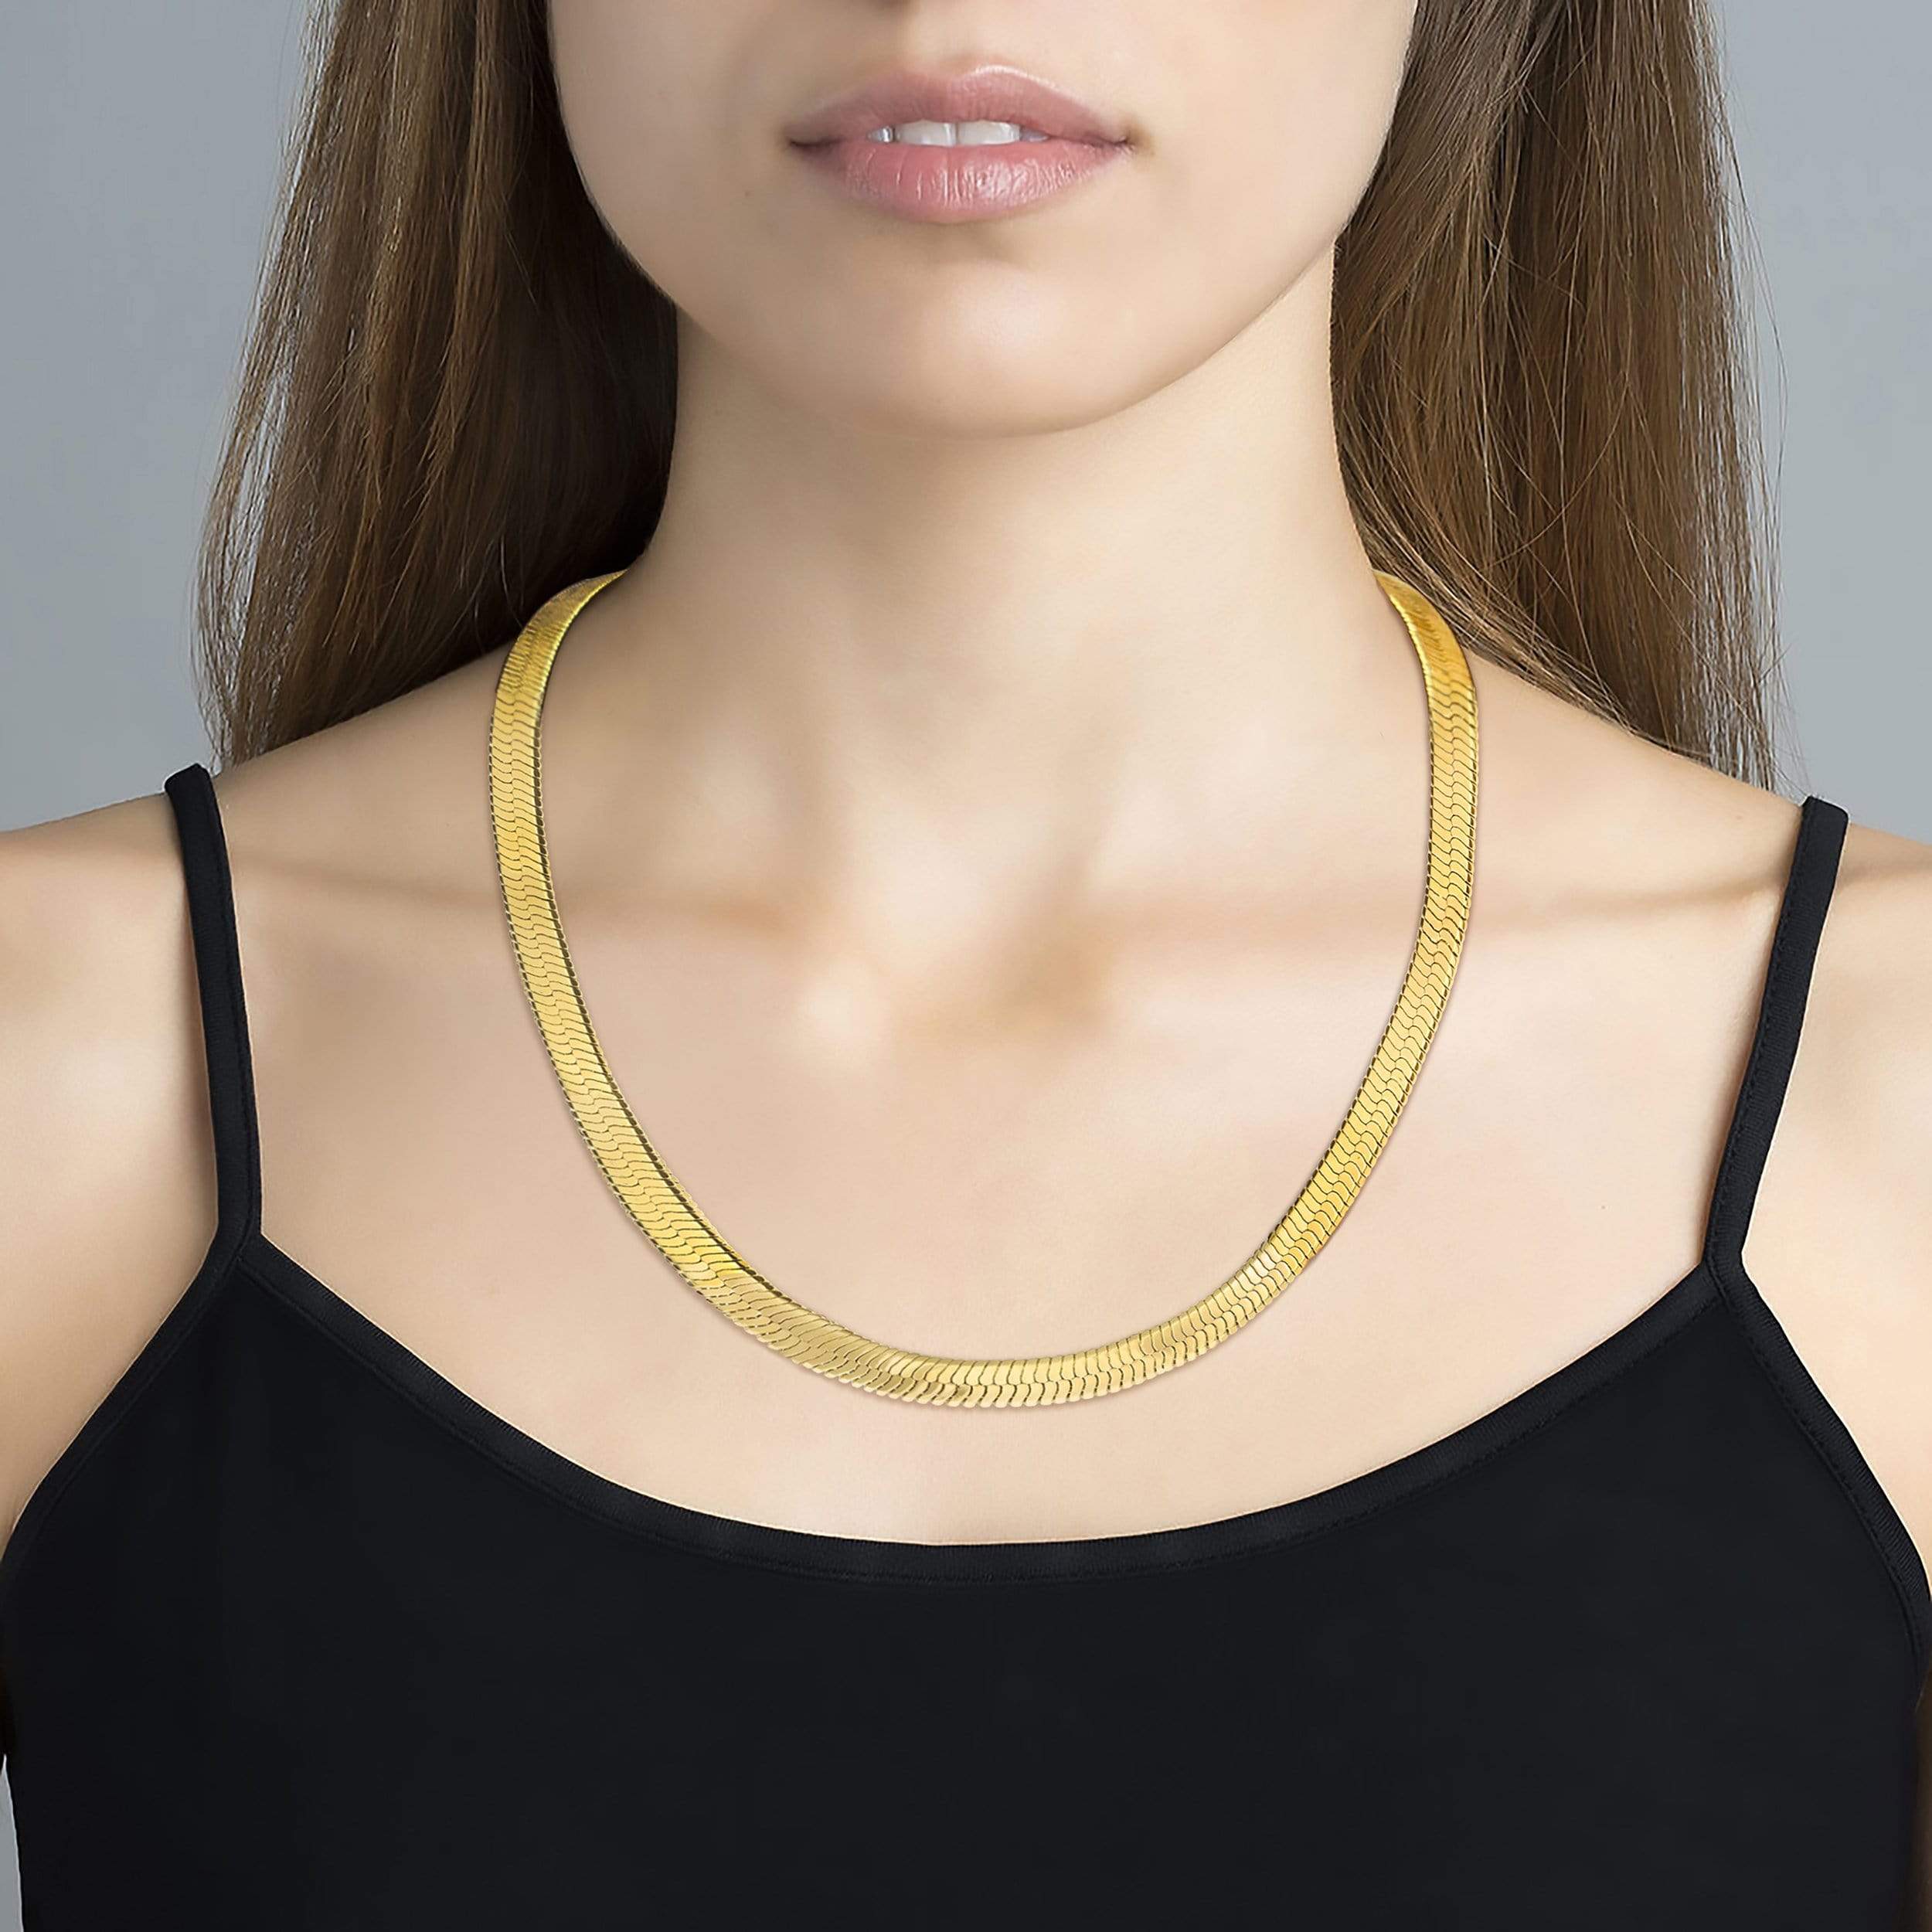 Lynora Jewellery Necklace 18" / Yellow Gold Plate Flat Chain Necklace Yellow Gold Plate